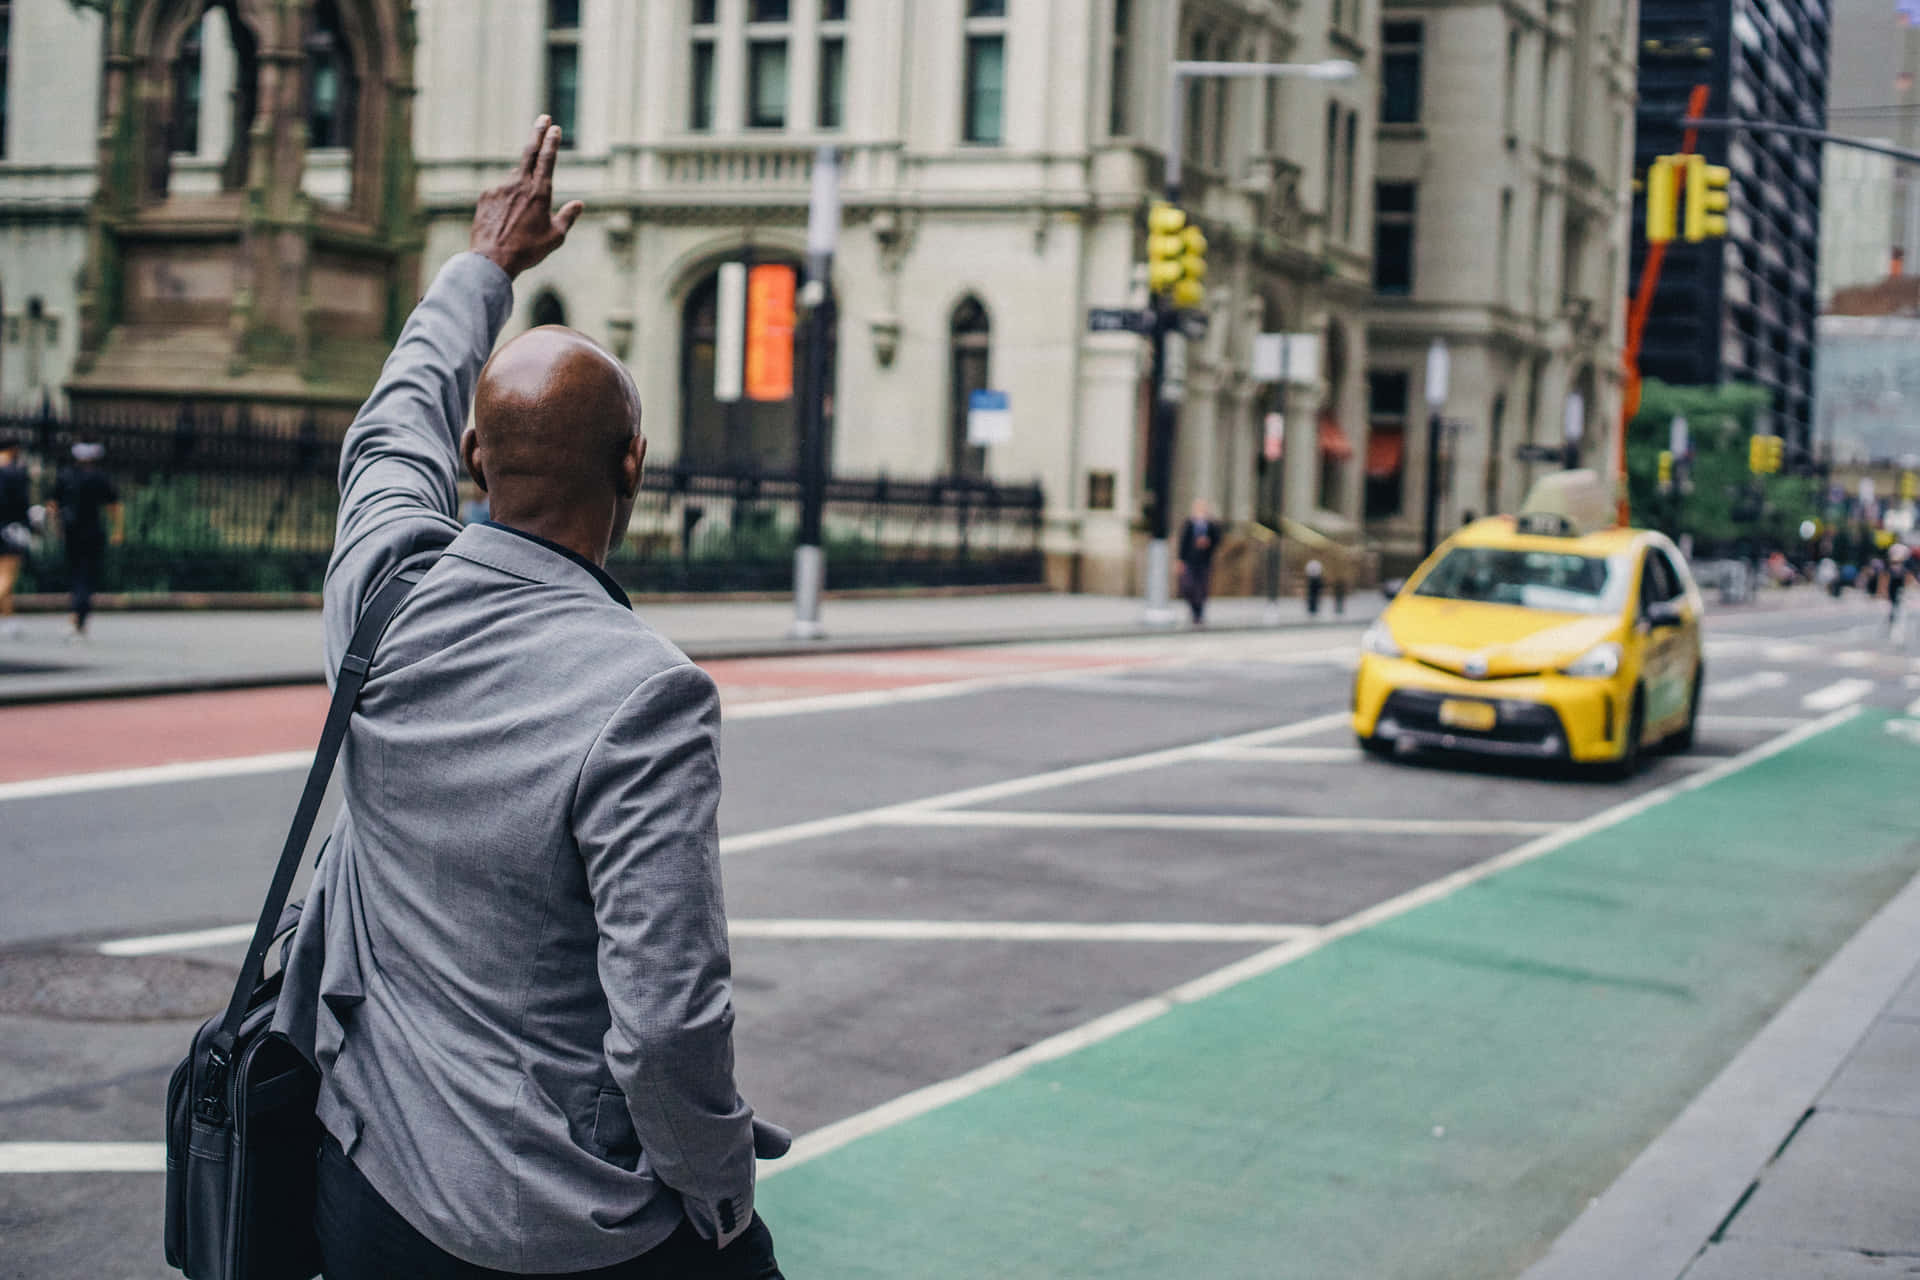 A Man Waving At A Taxi On The Street